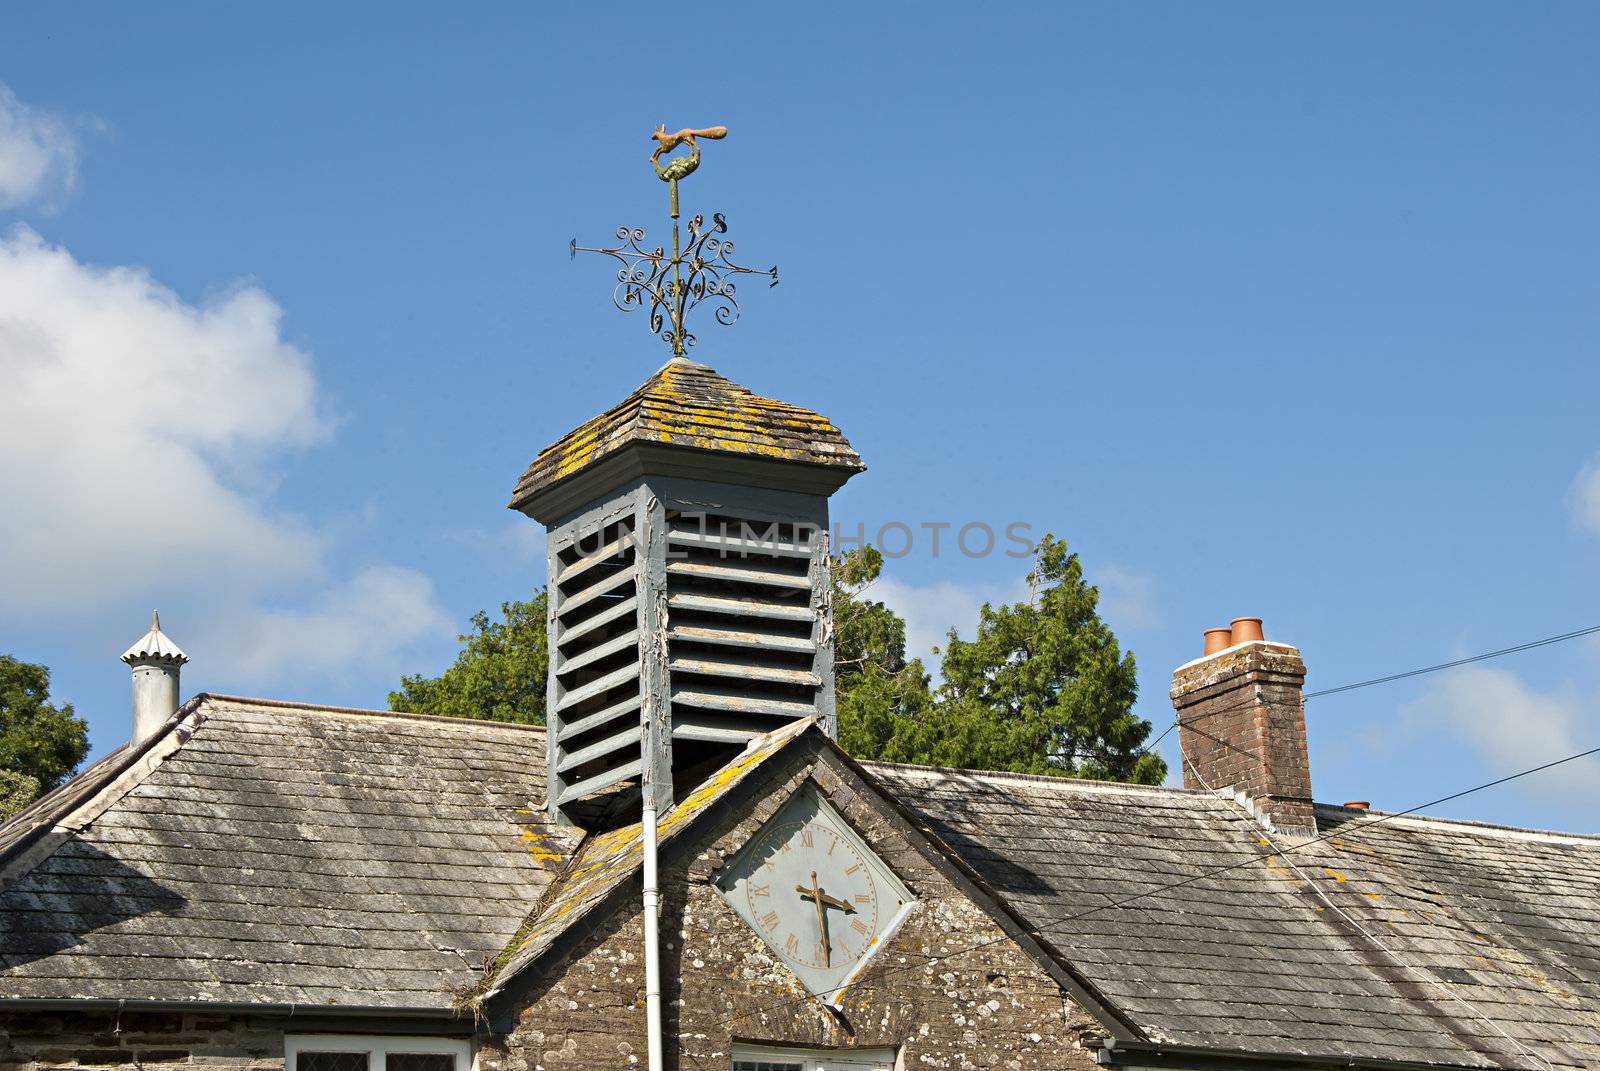 Weathervane and Clocktower by d40xboy